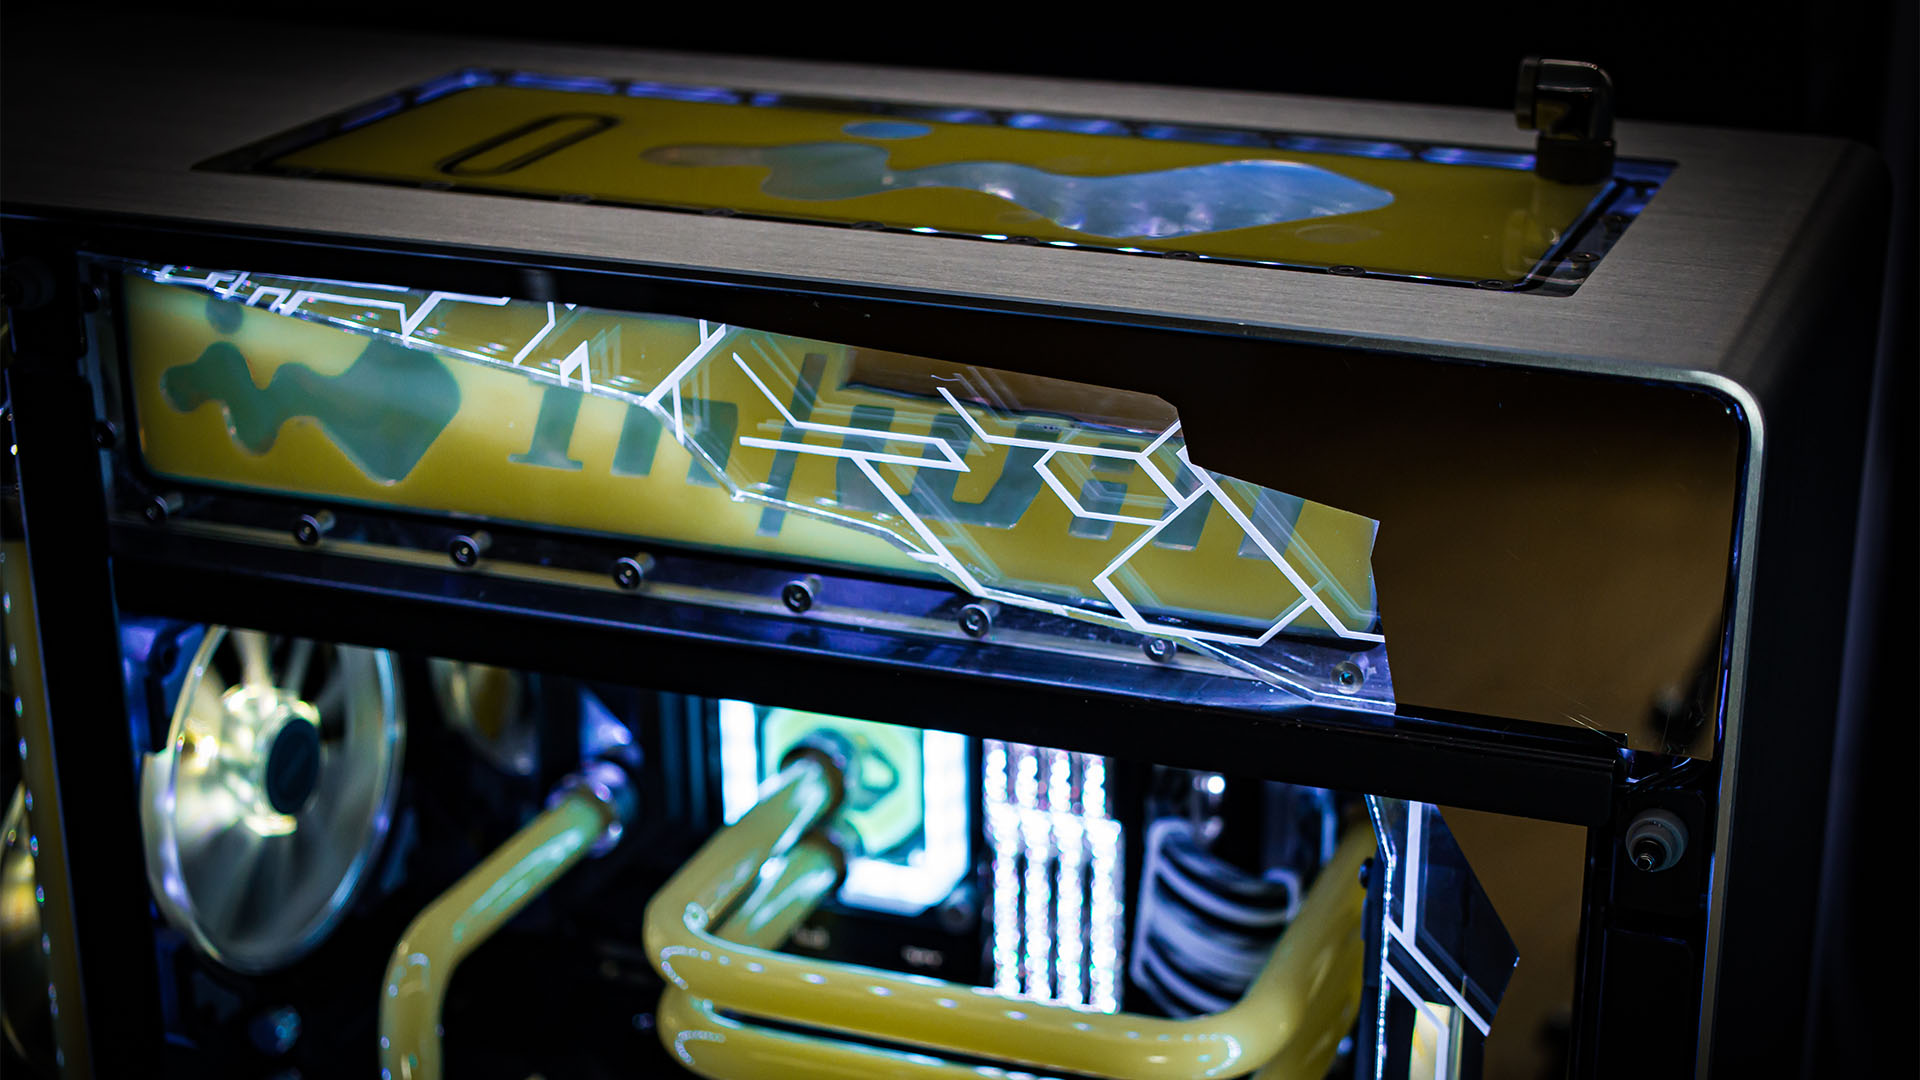 A crystal design on the front of the water cooled gaming PC